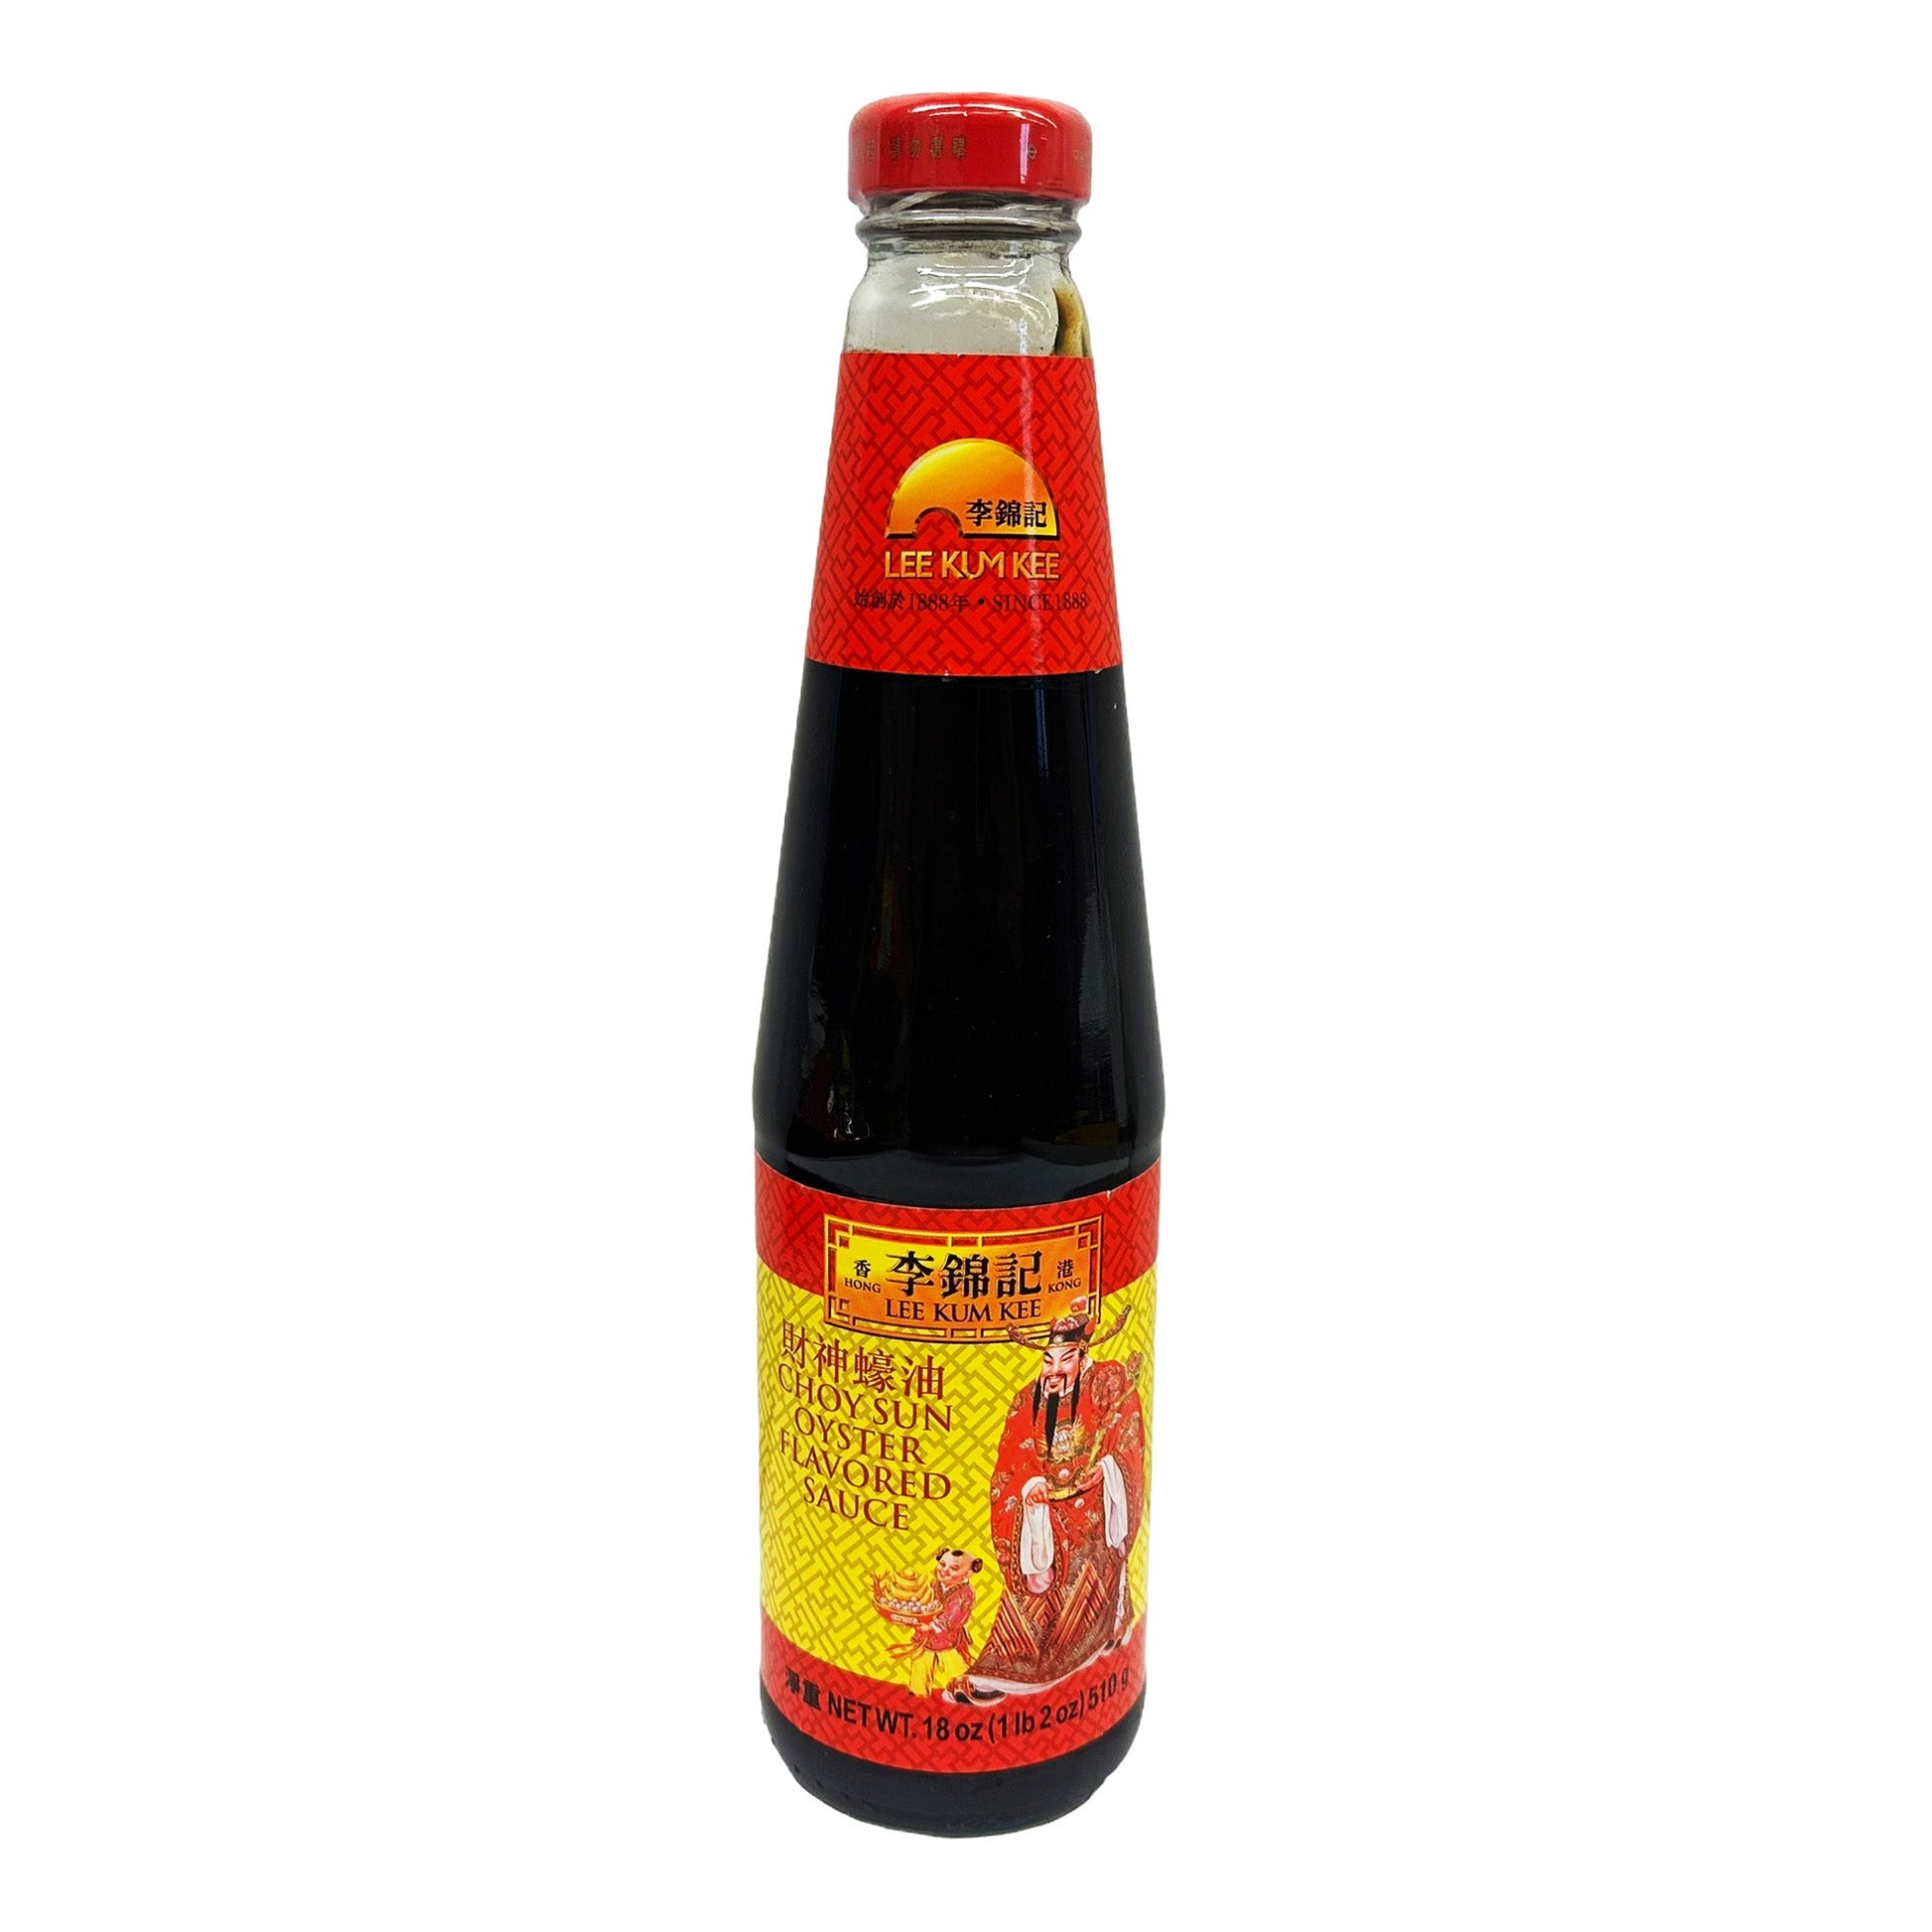 Front graphic image of Lee Kum Kee Choy Sun Oyster Sauce 18oz